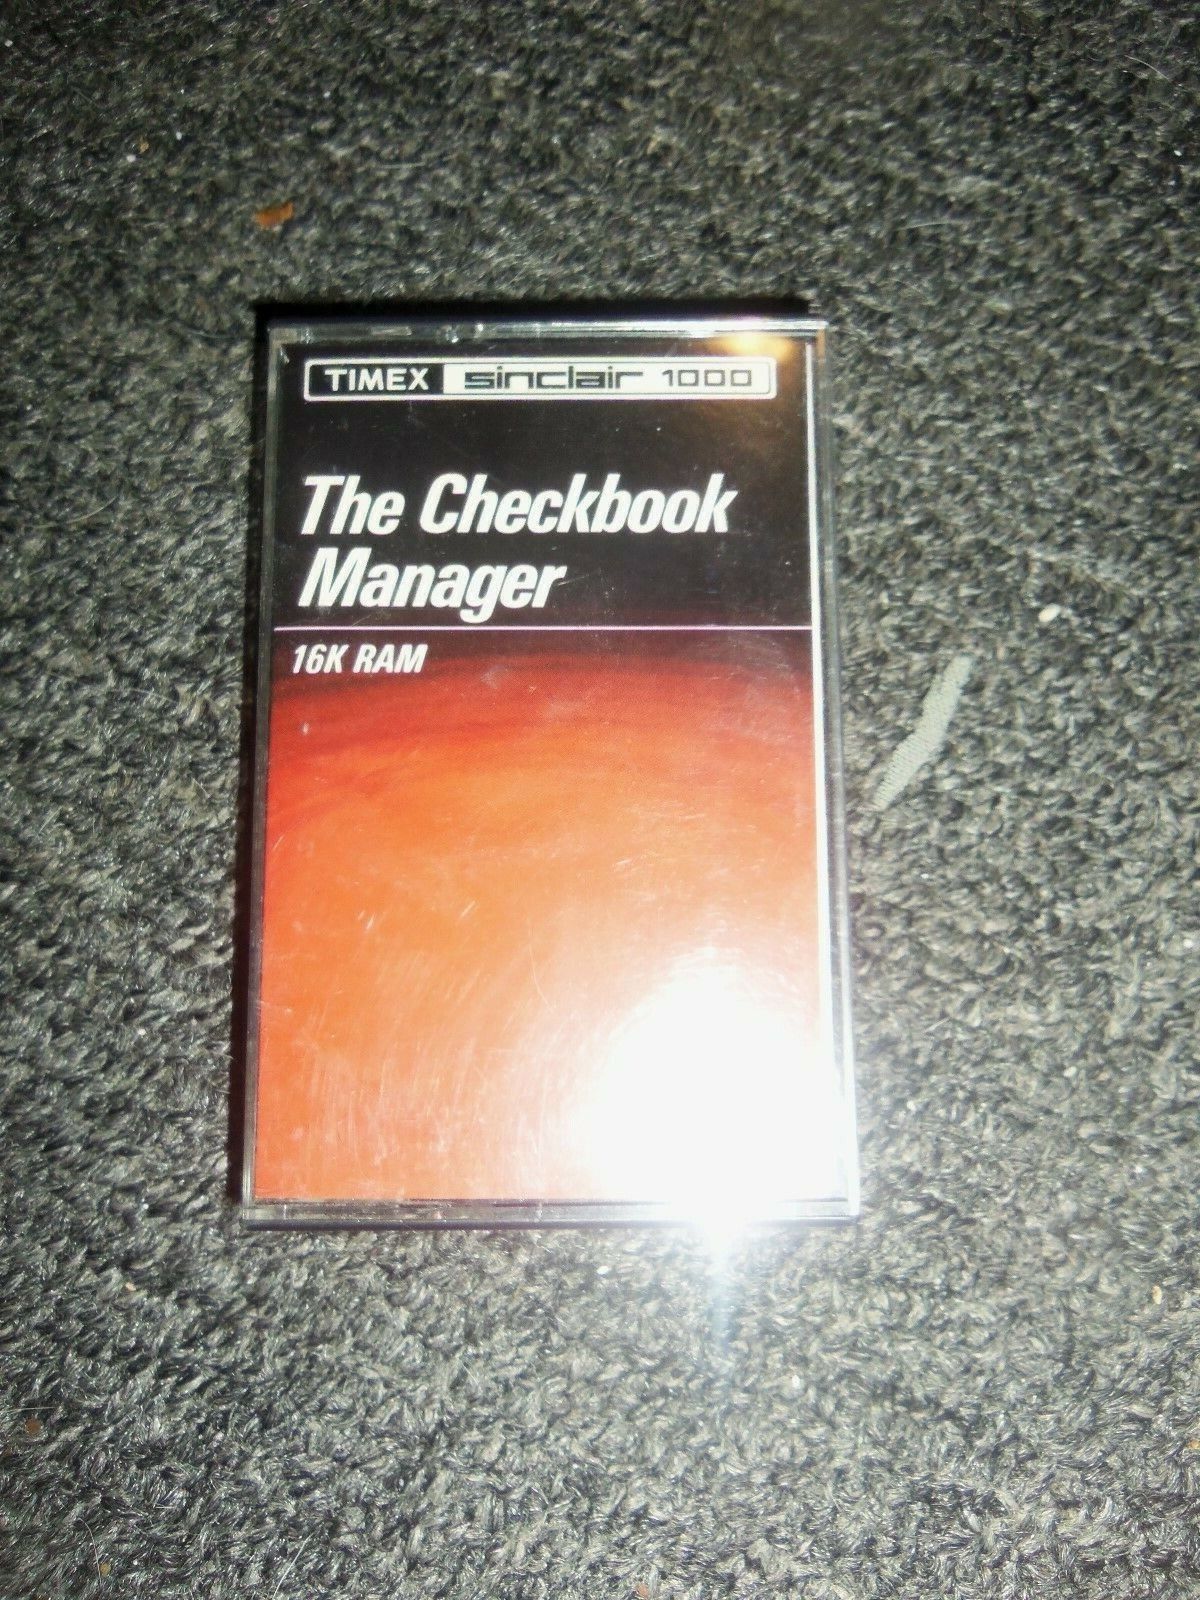 The Checkbook Manager for Timex Sinclair 1000